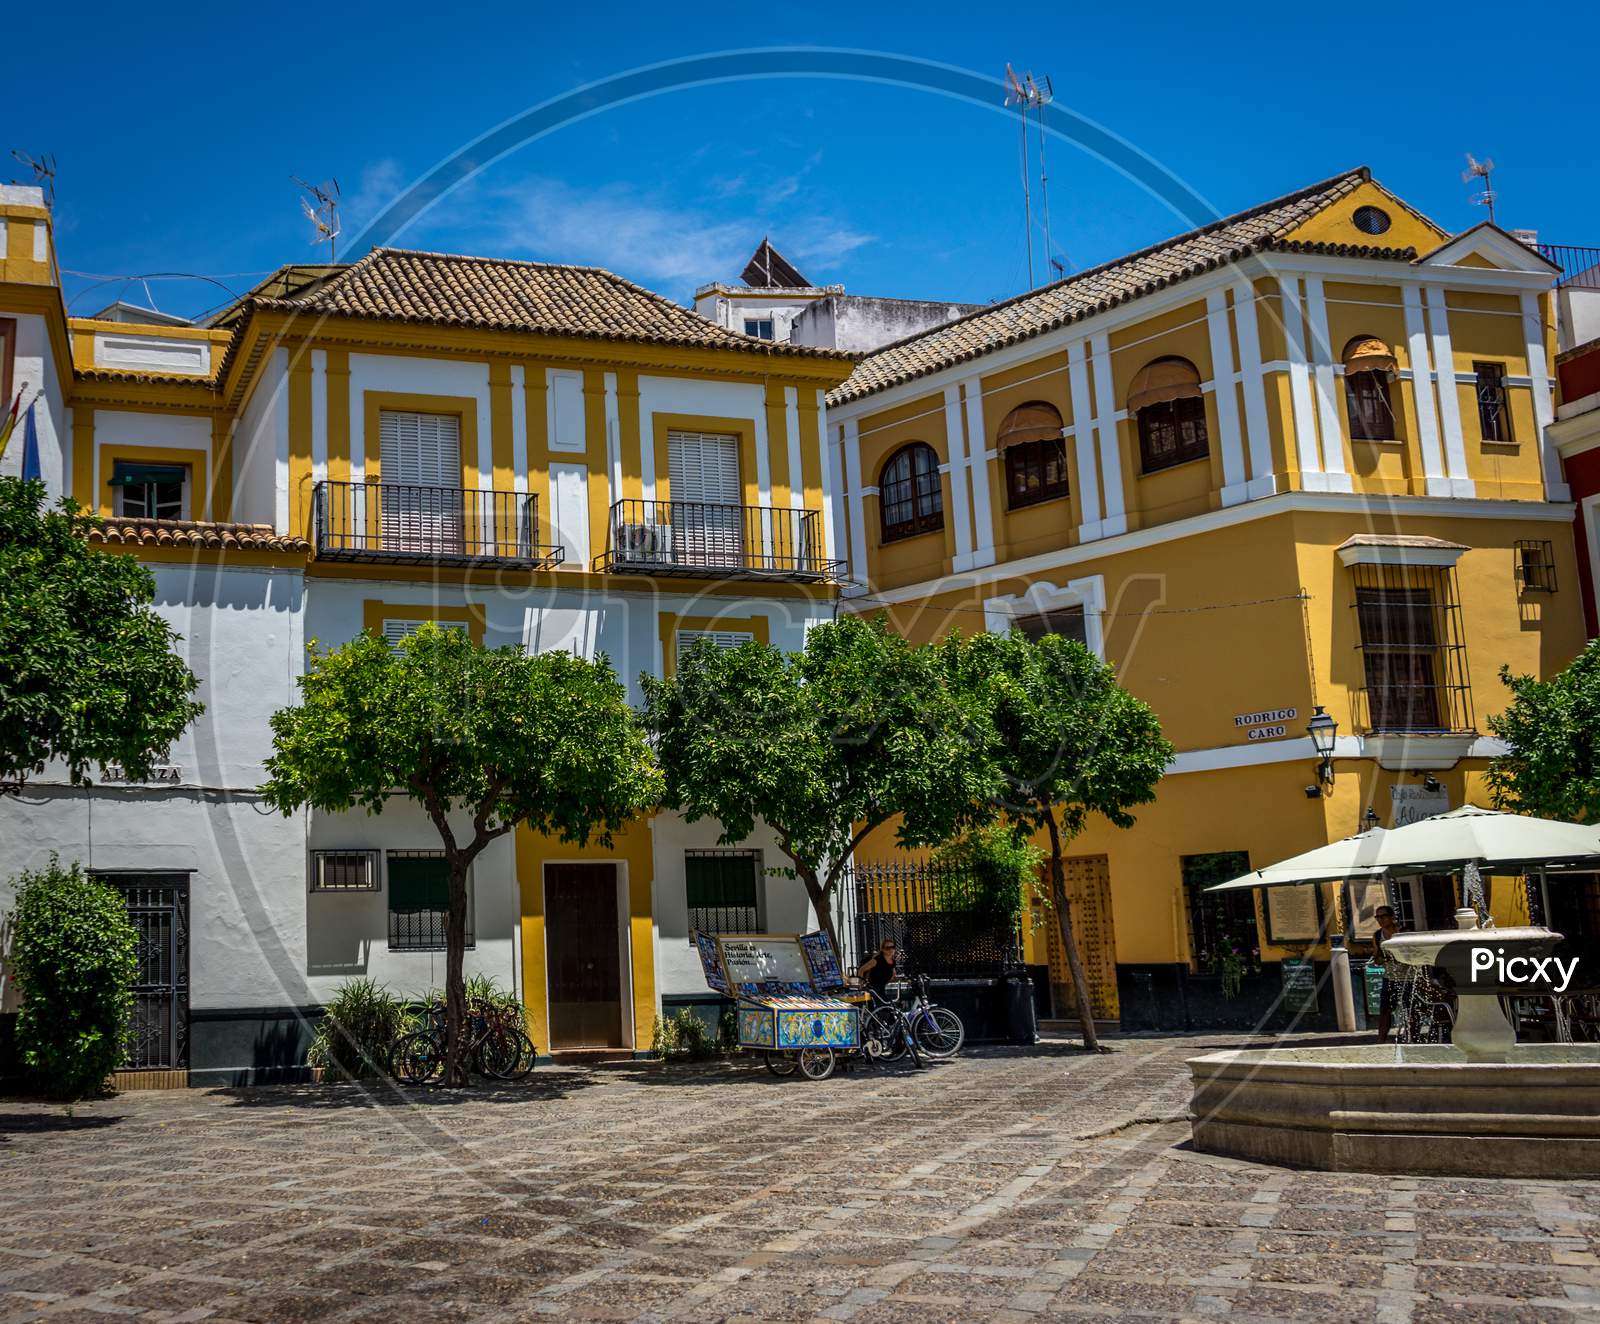 A View Of The Street In Seville On A Hot Summer Day With A Blue Sky In Seville, Spain, Europe